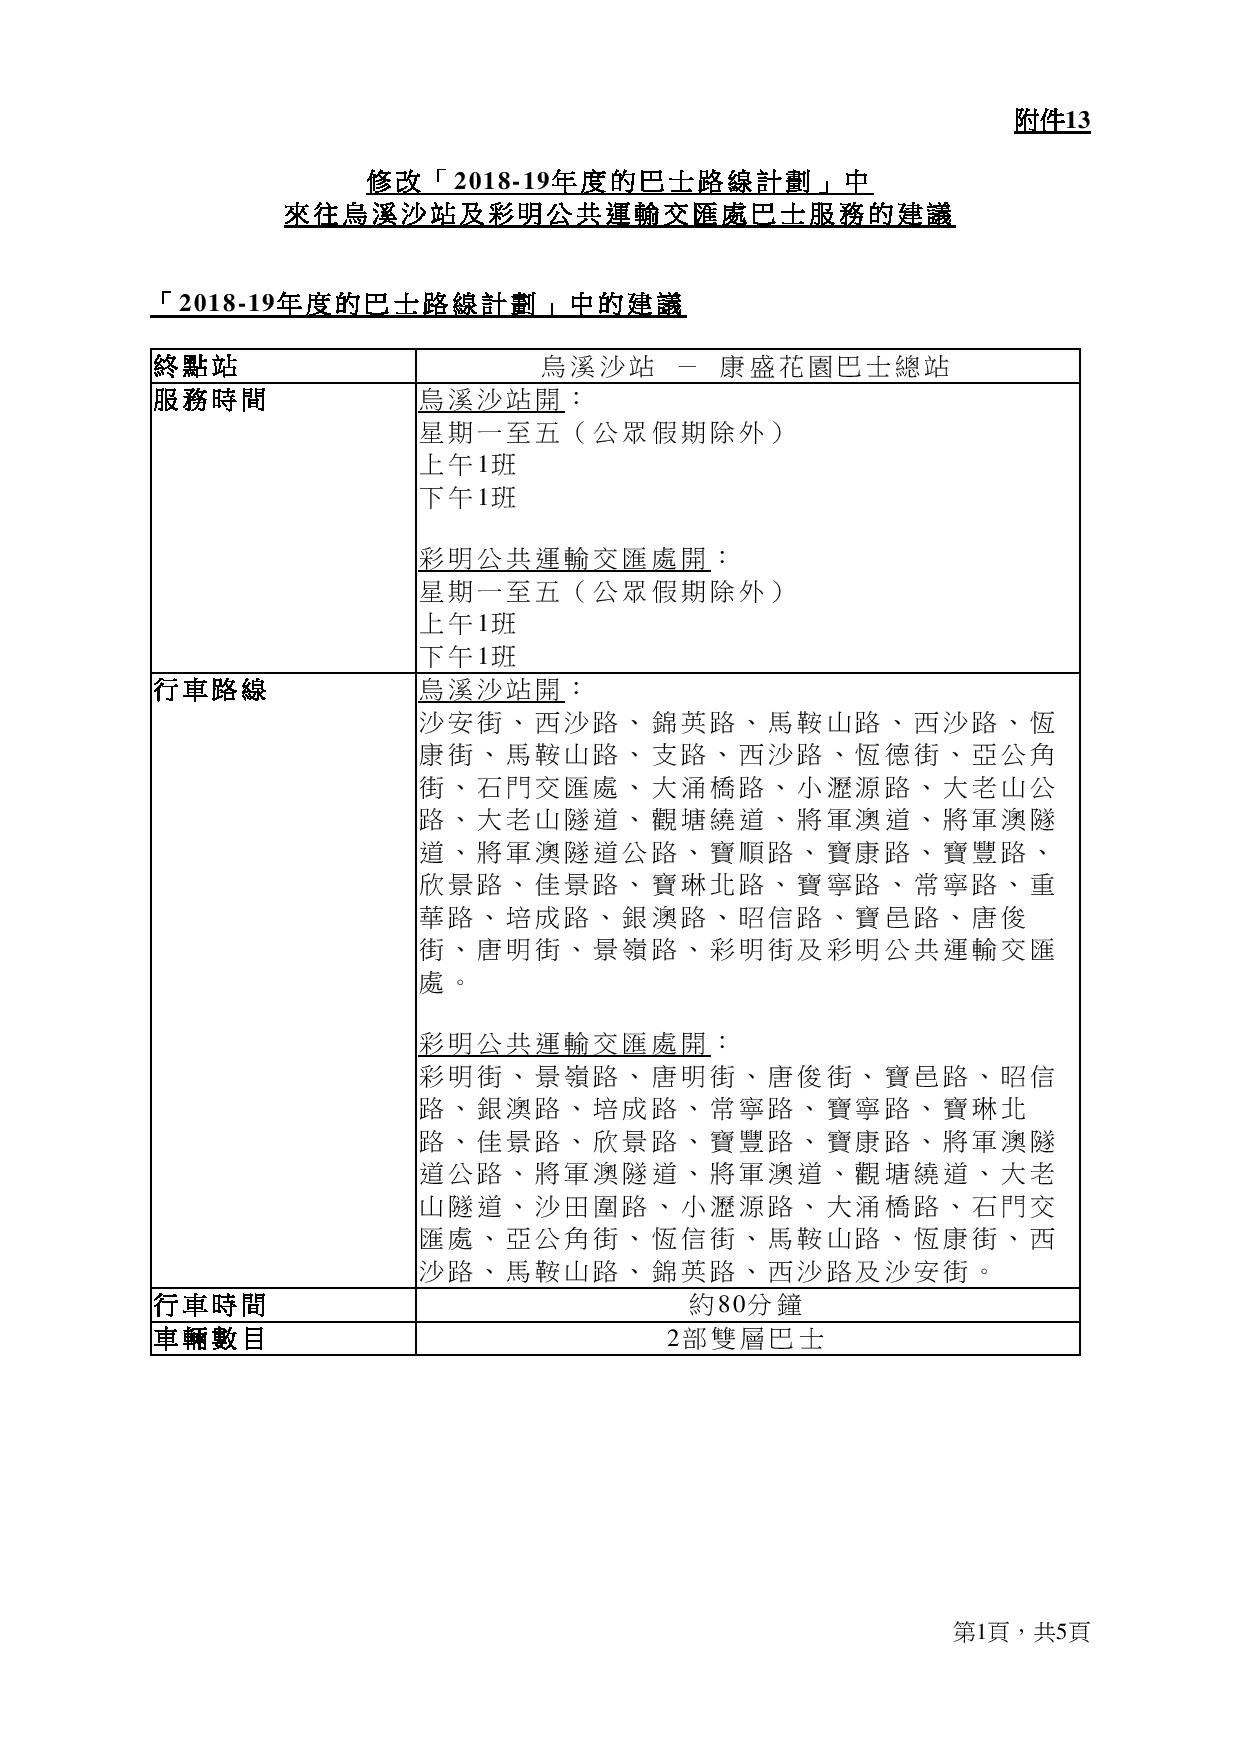 Document-page-056.jpg